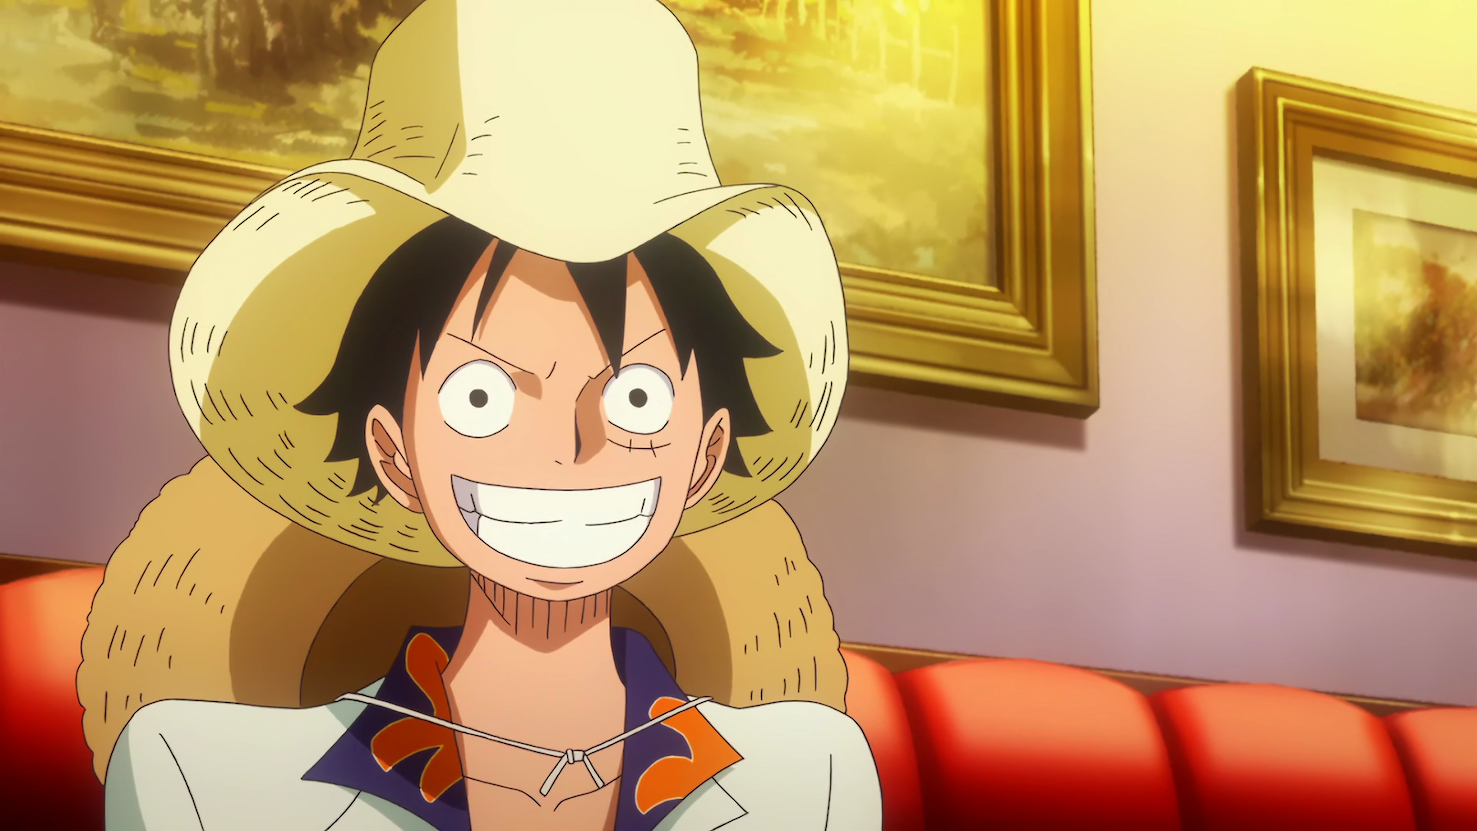 EXCLUSIVE: One Piece Film: Gold First-Look Clip